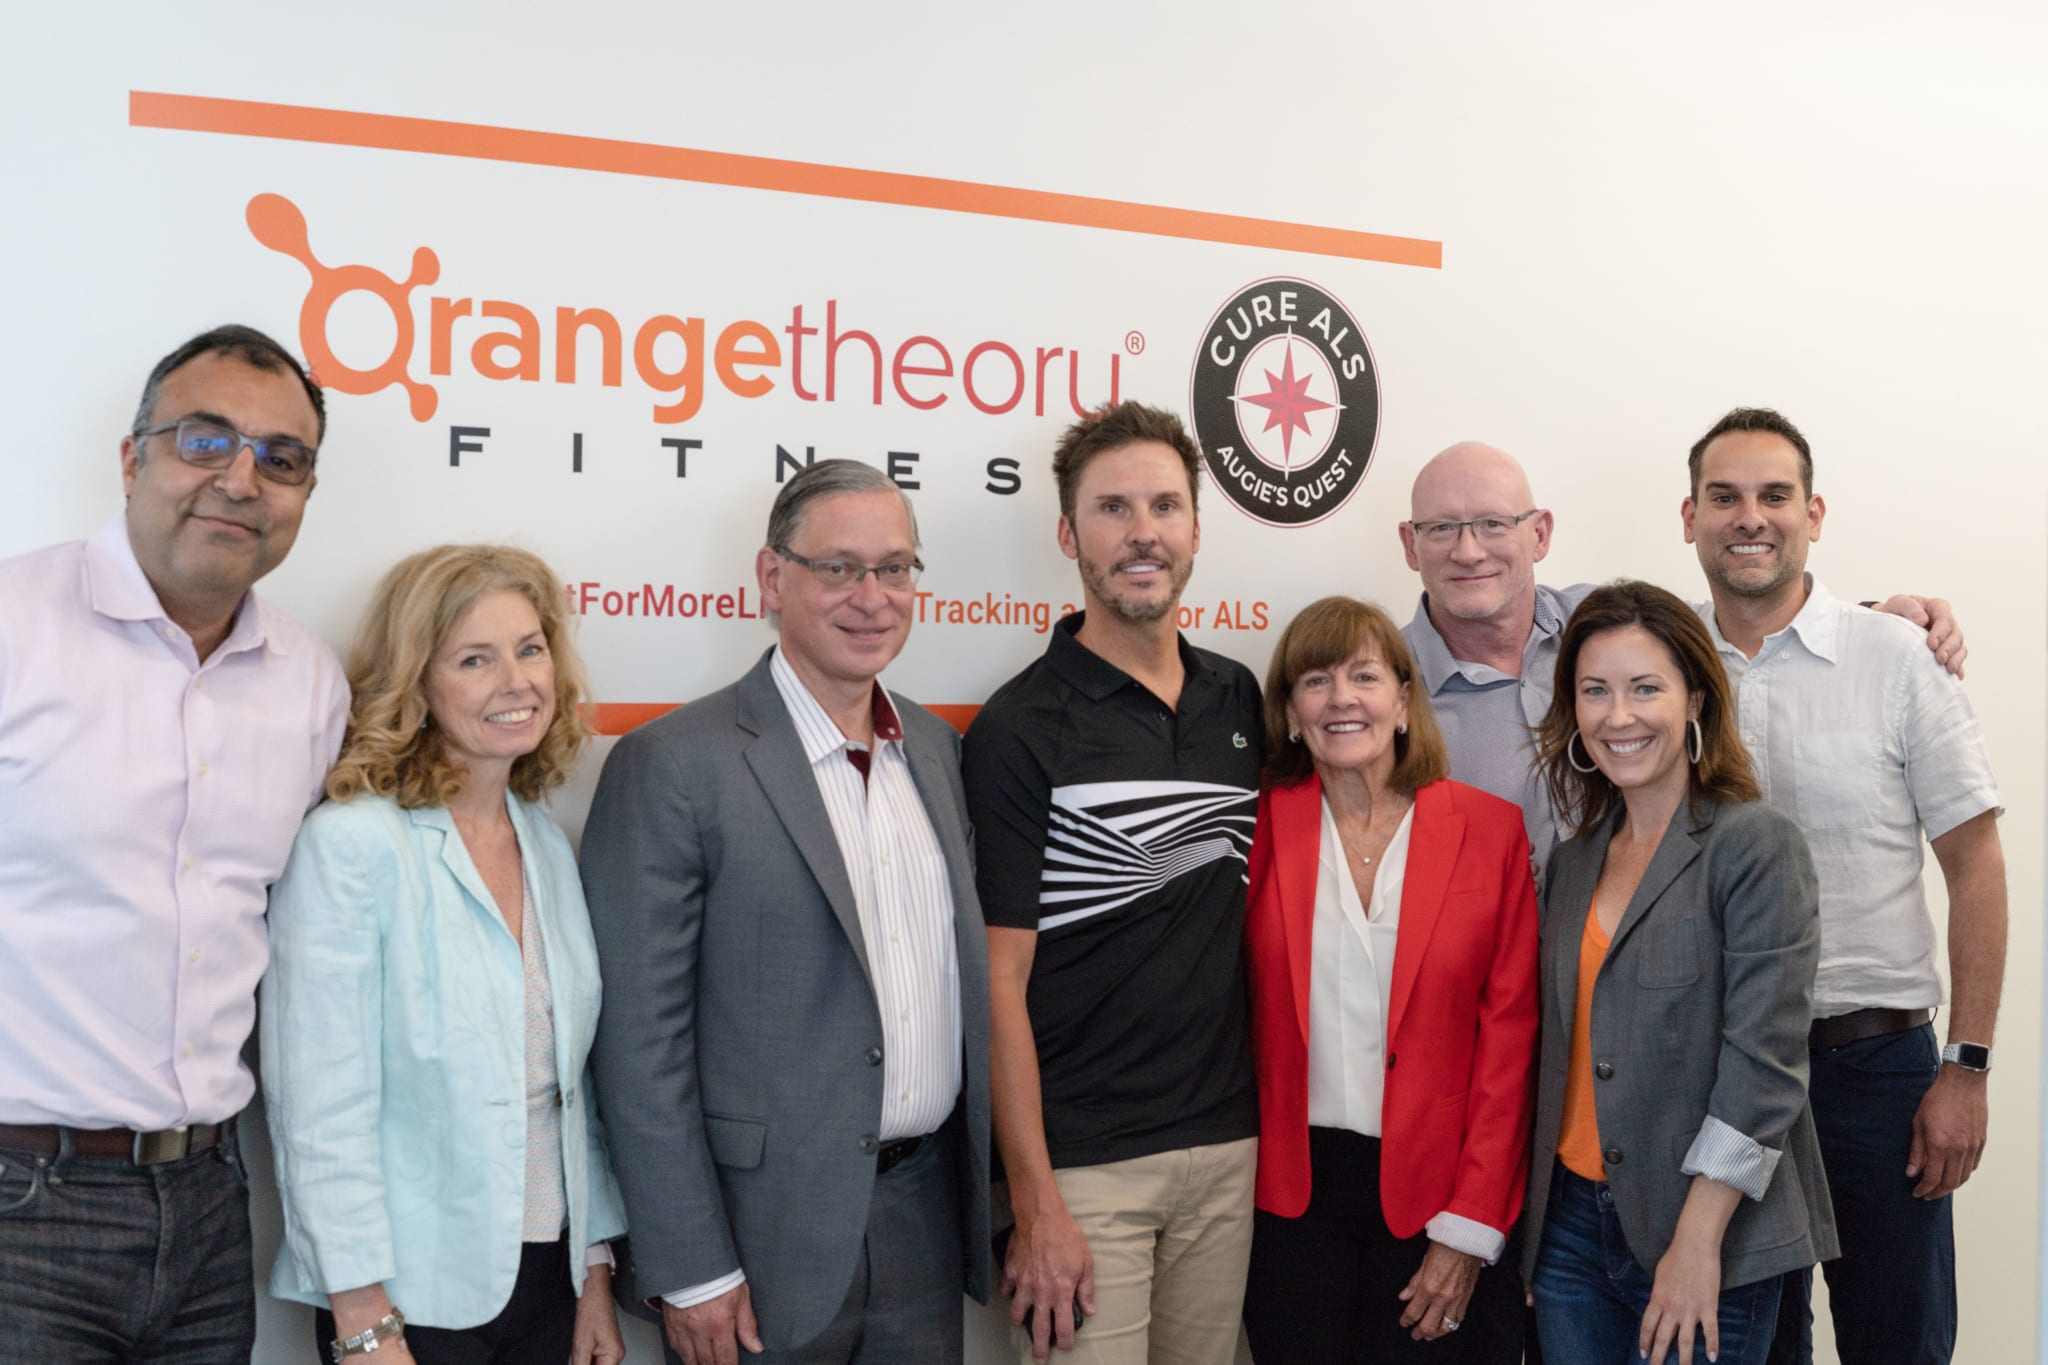 Orangetheory Fitness Begins Quest to Raise $1 Million in Two Weeks